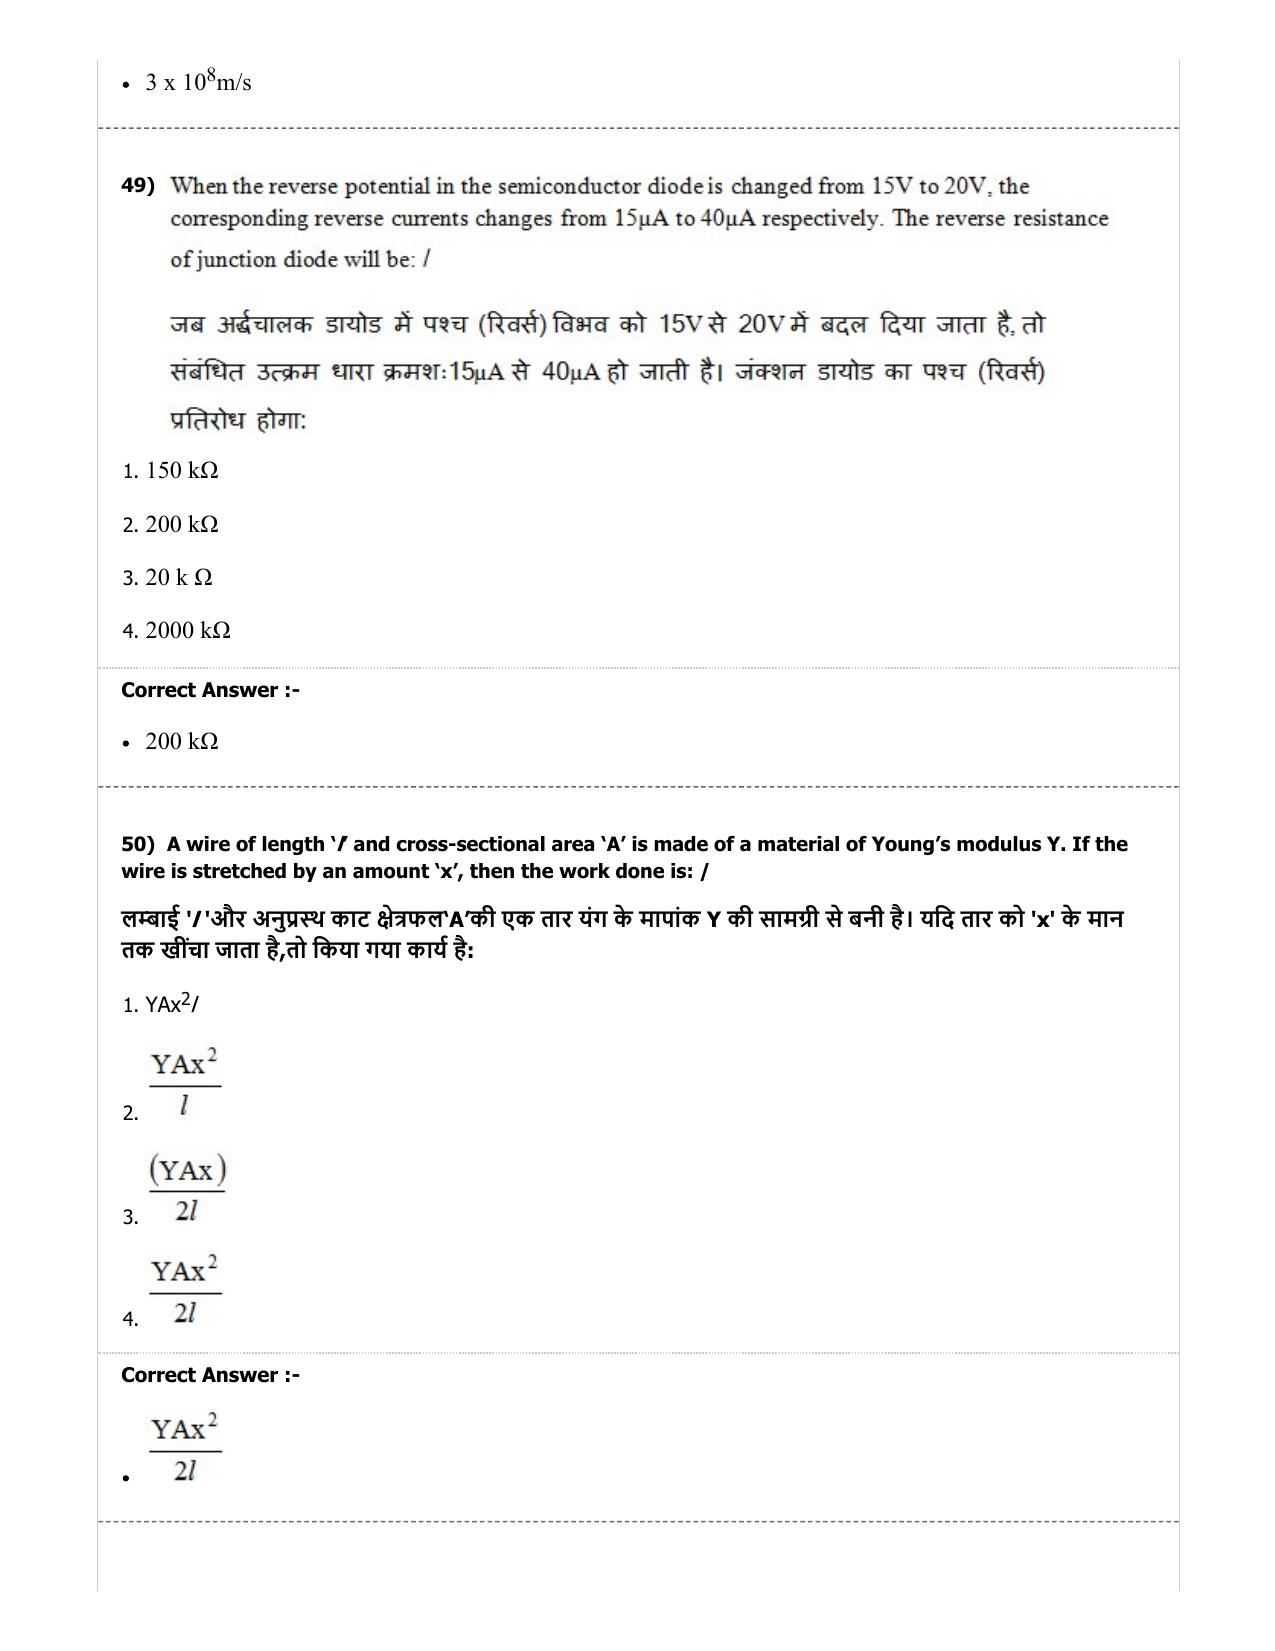 MP PAT (Exam. Date 29/06/2019 Time 2:00 PM) - PCA Question Paper - Page 19